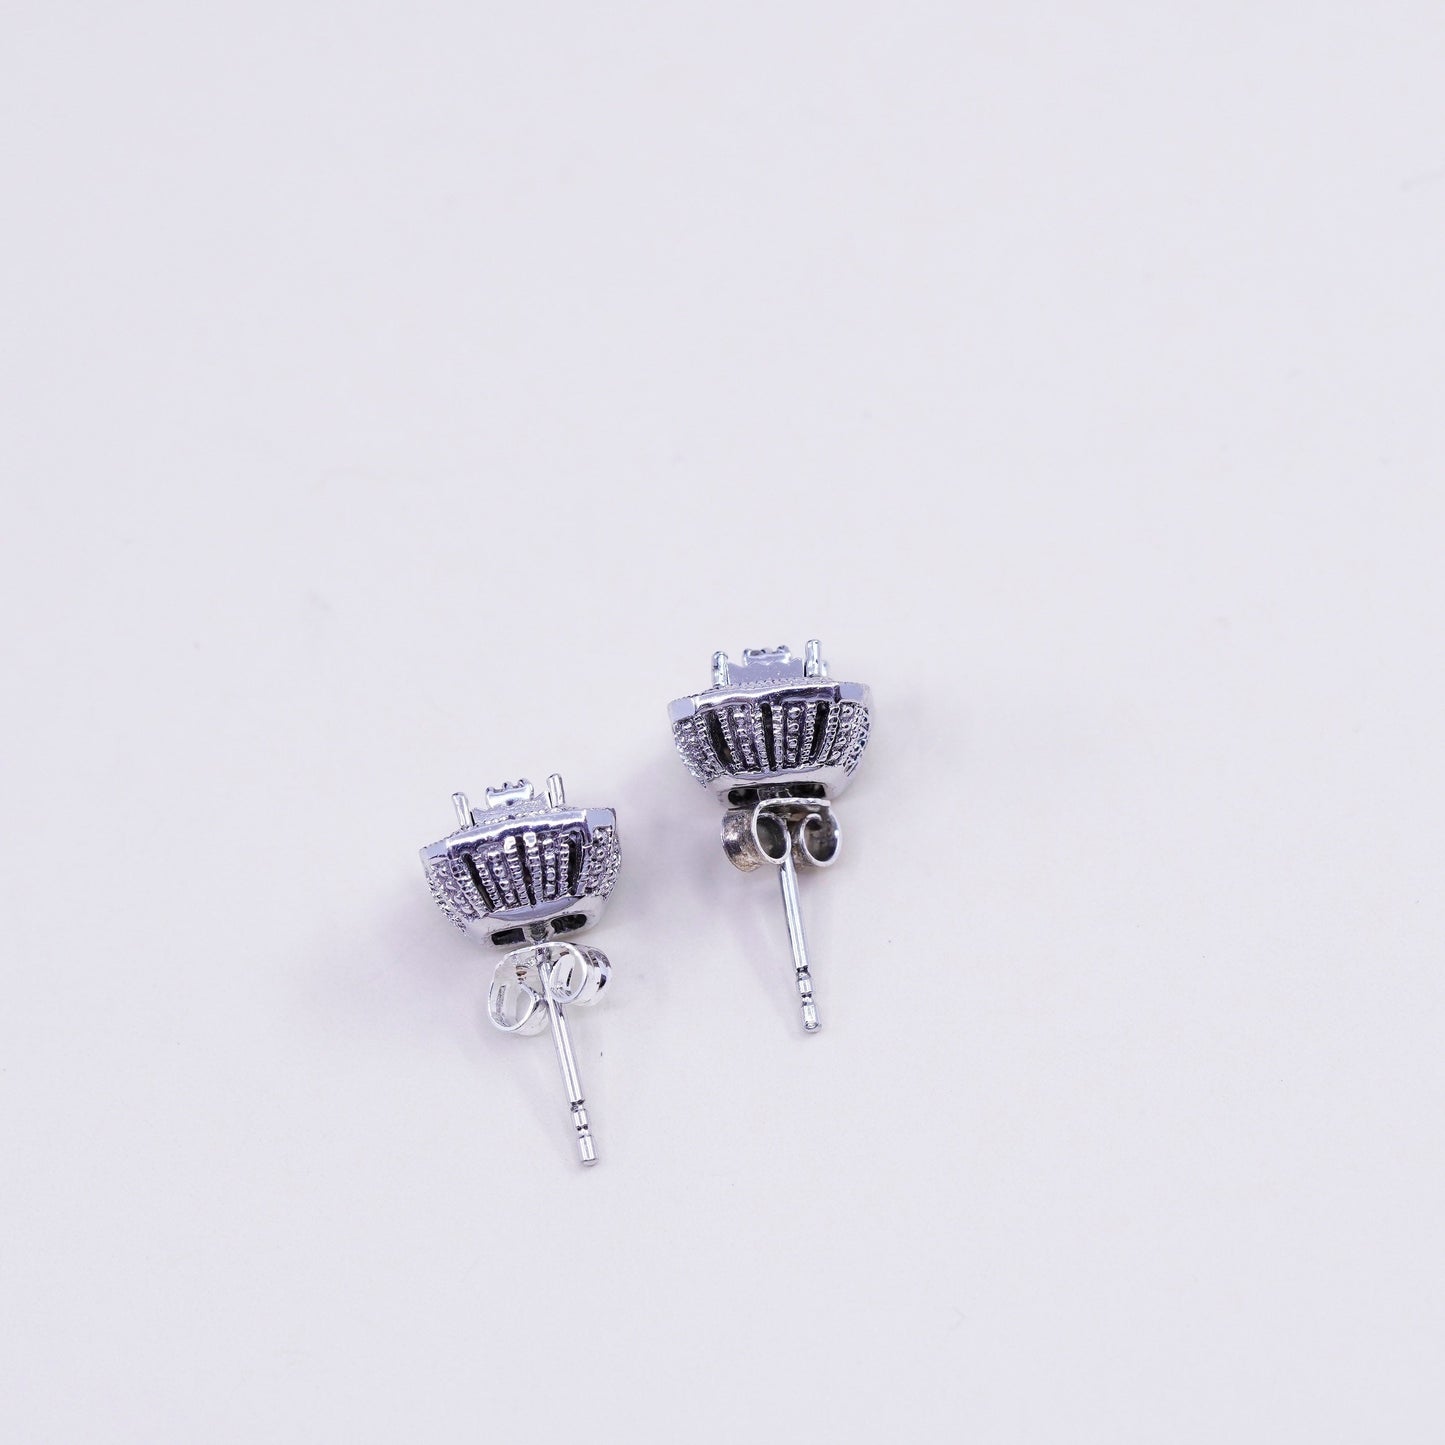 Vintage sterling silver handmade earrings, 925 square shaped studs with diamond